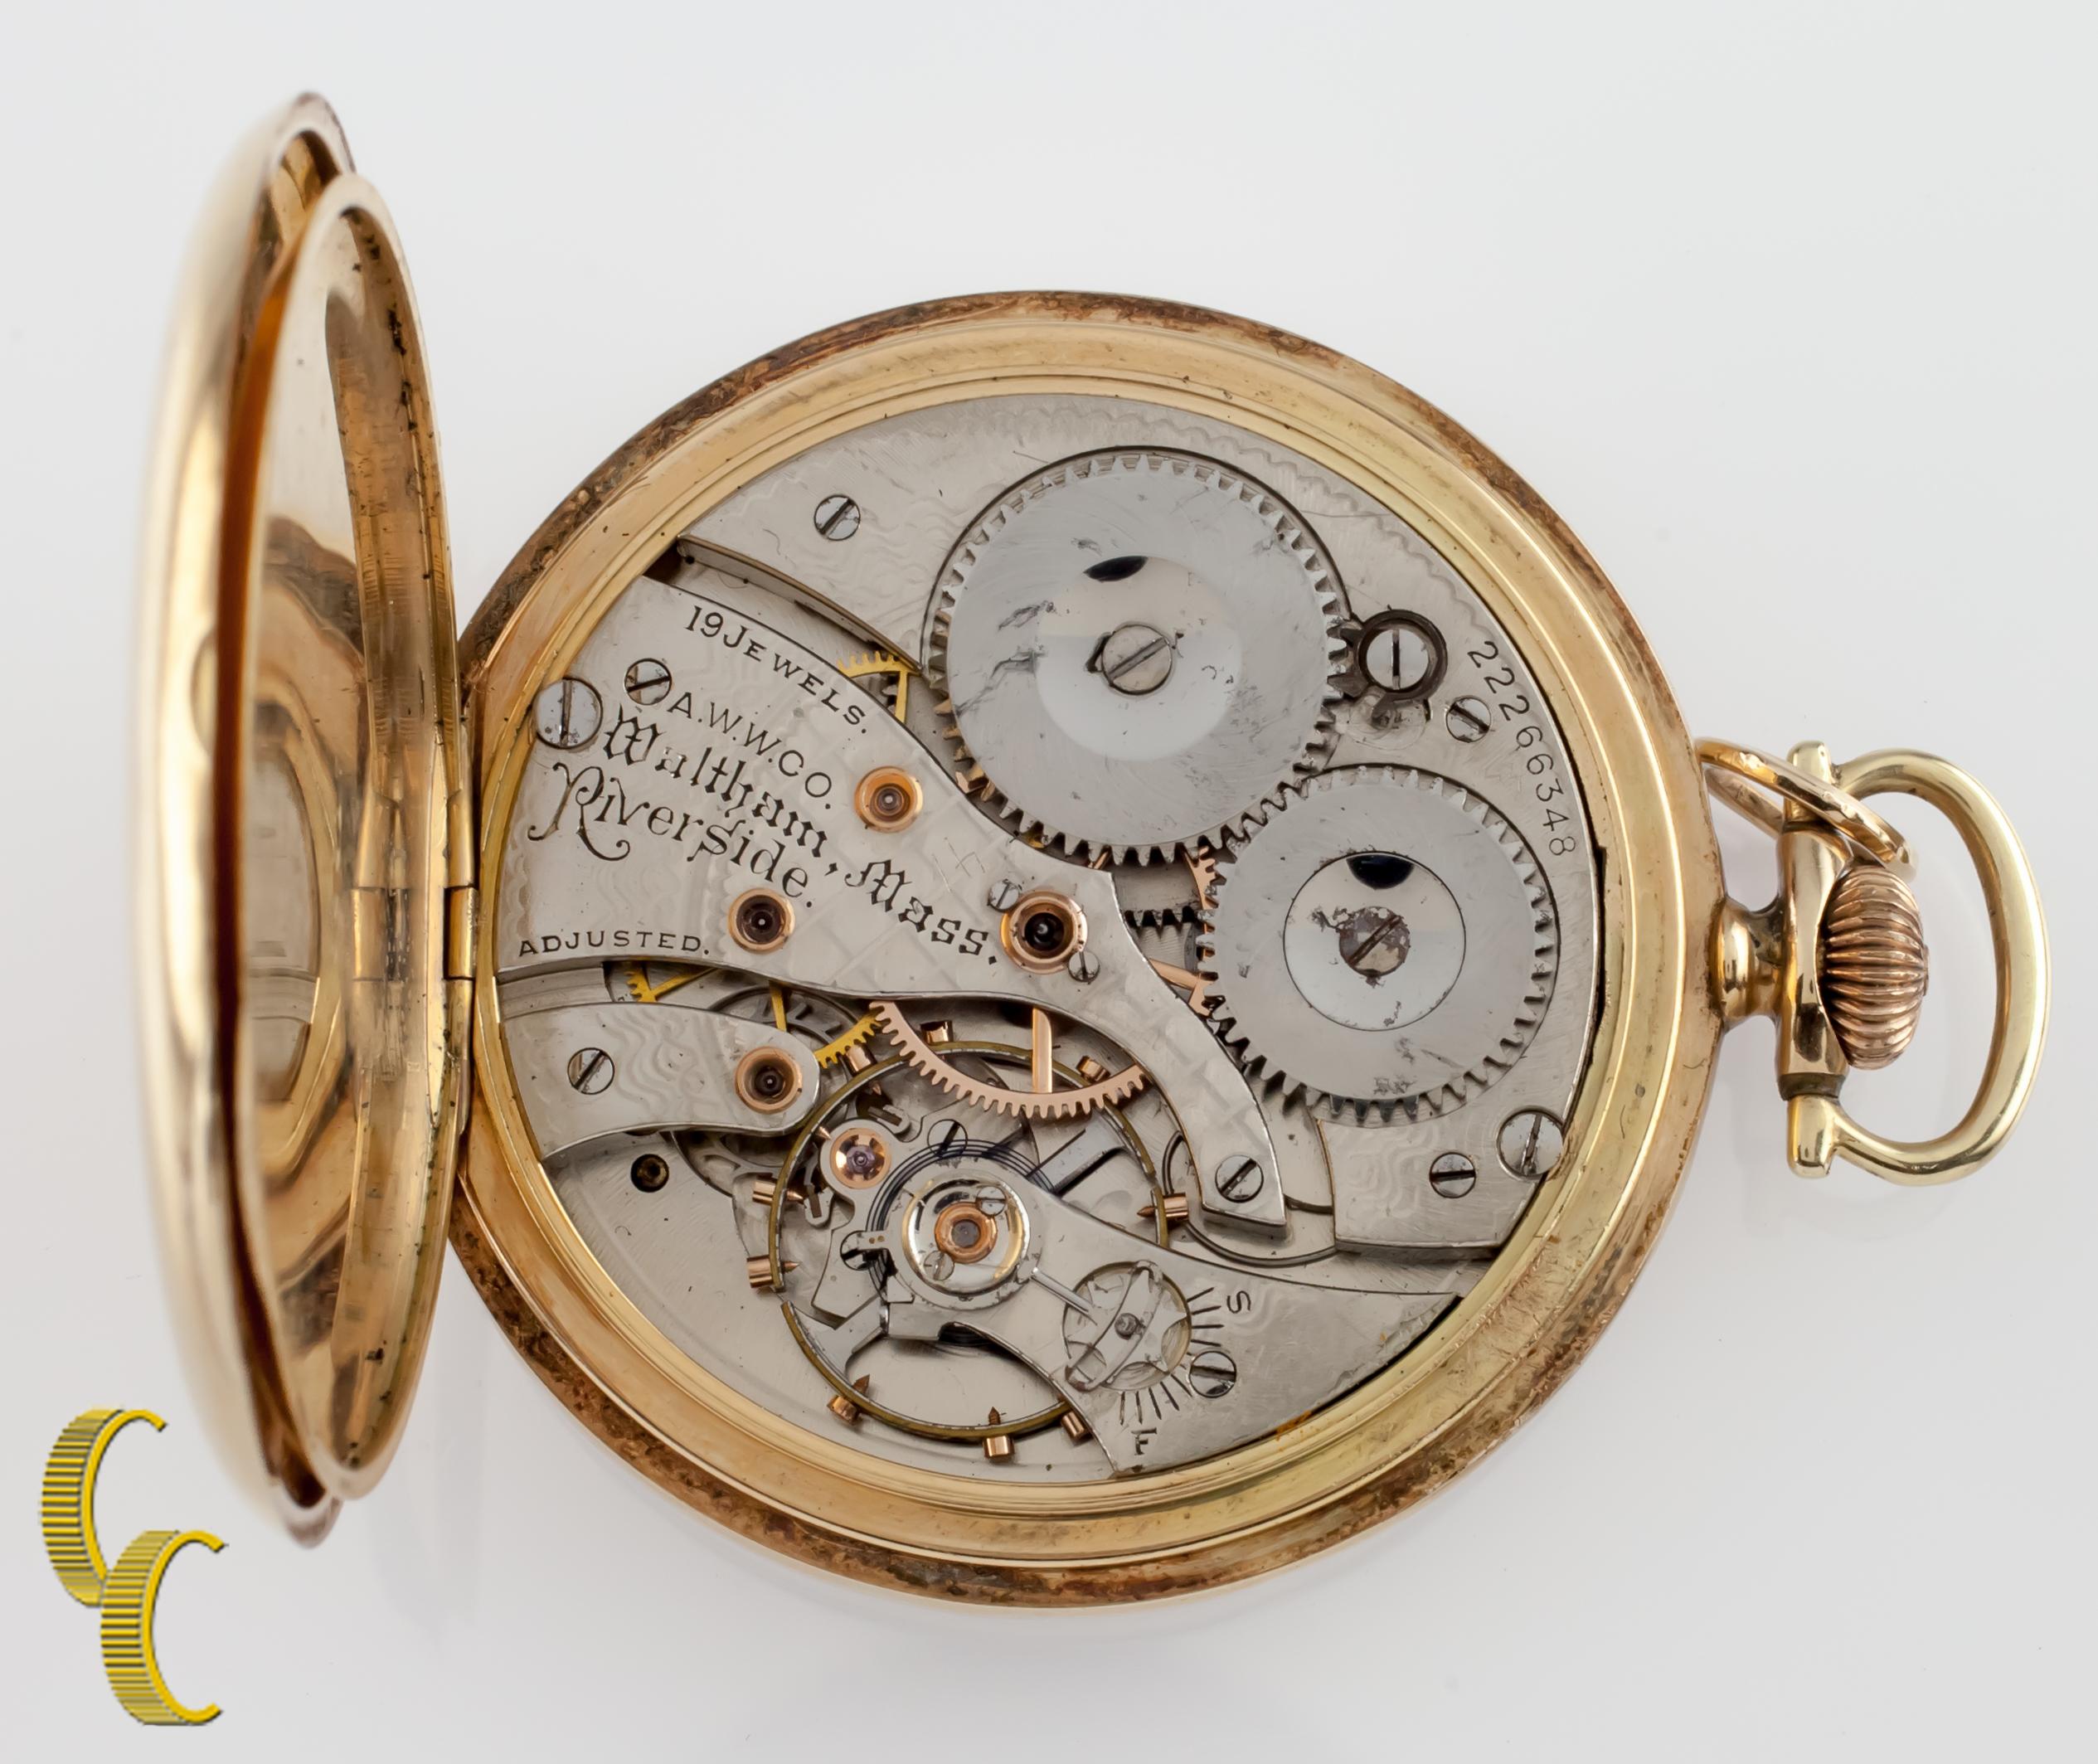 Beautiful Antique Waltham Pocket Watch w/ Gold Color Dial Including Blue Hands & Dedicated Second Dial
14K Yellow Gold Case w/ No design on Case
Black Arabic Numerals
Case Serial # 54417
19-Jewel Waltham Movement Serial # 22266348
Grade #